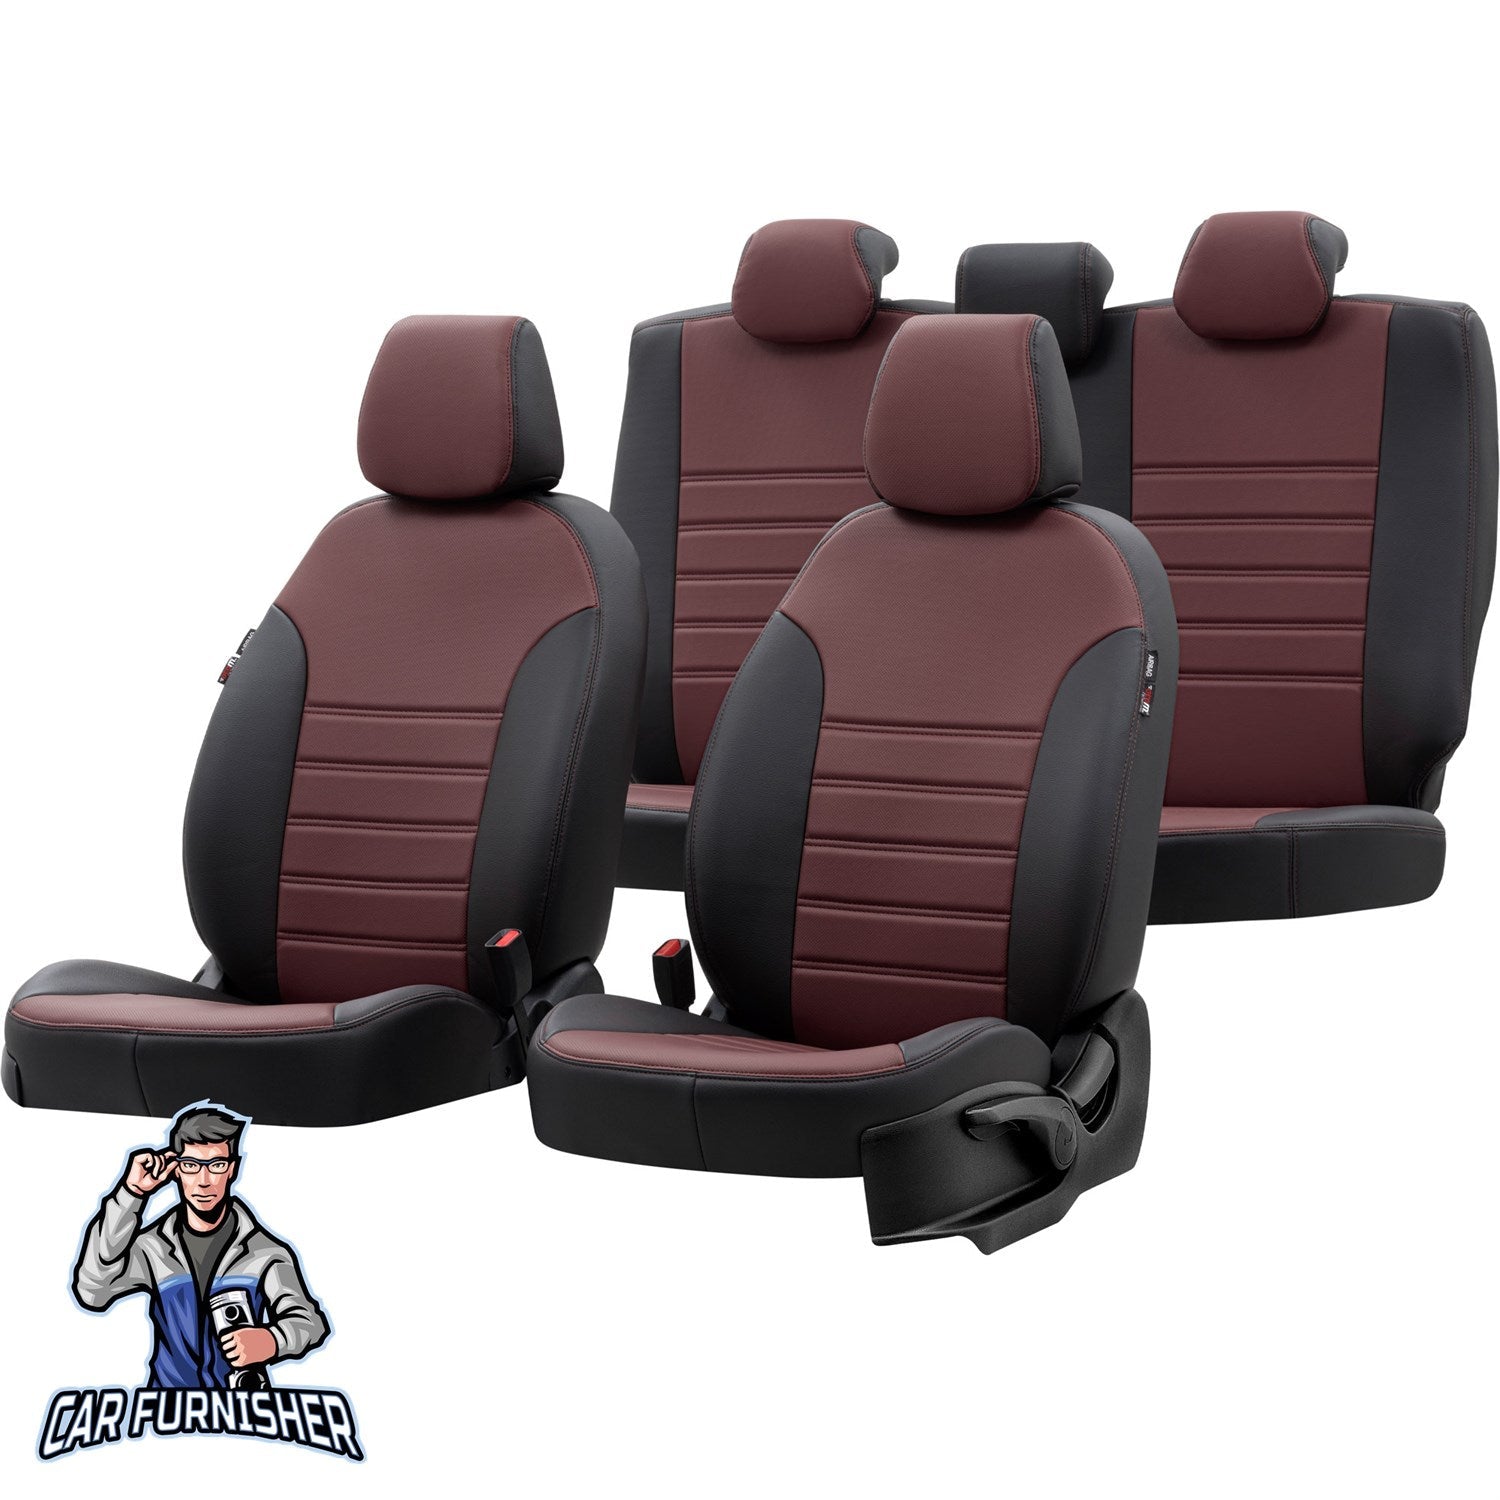 Toyota Corolla Seat Cover Istanbul Leather Design Burgundy Leather